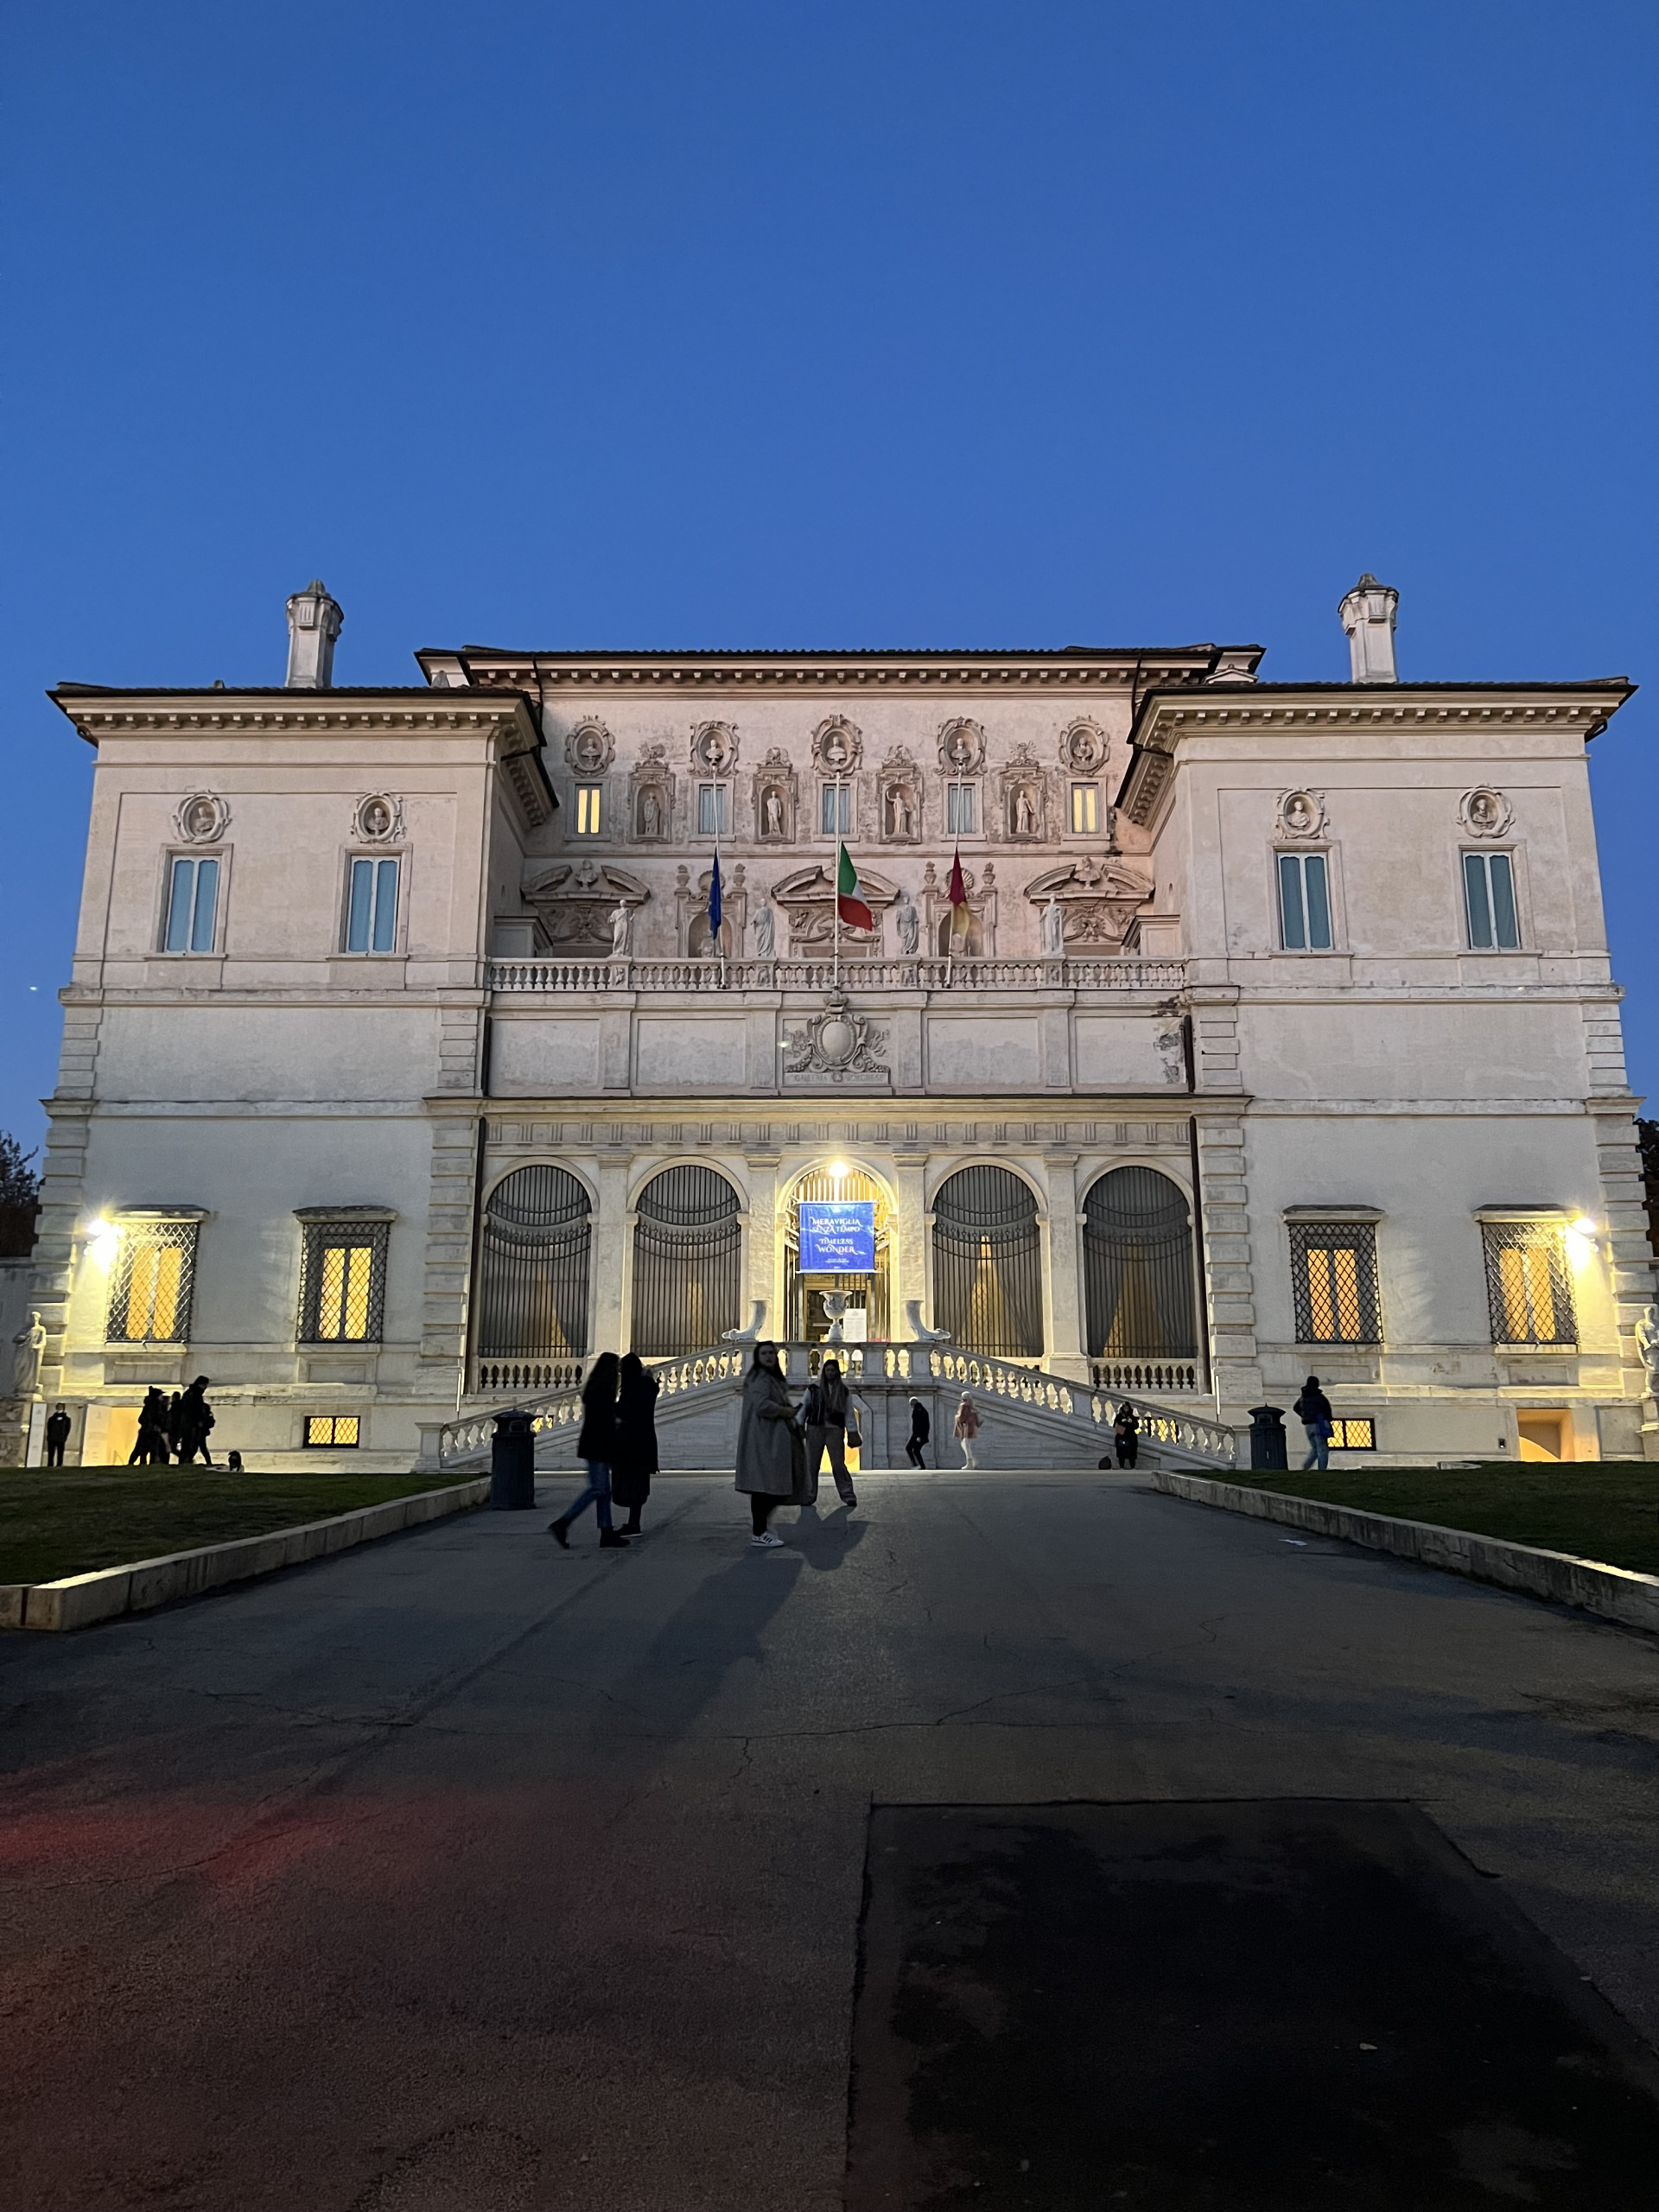 COME DISCOVER GALLERIA BORGHESE IN THE EVENING